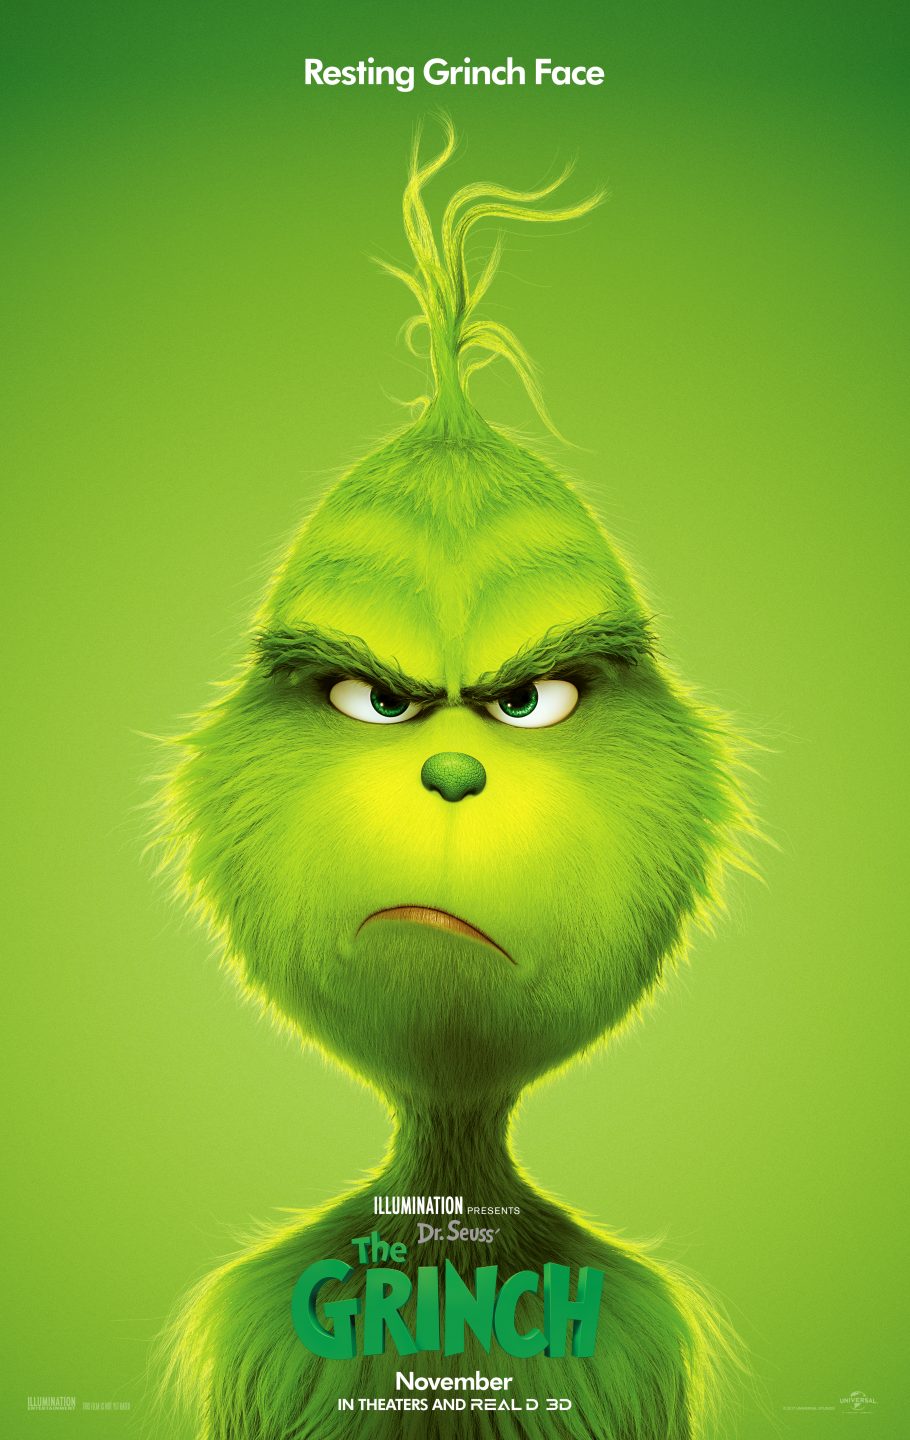 Dr. Seuss' The Grinch poster (Universal Pictures/Illumination Entertainment)